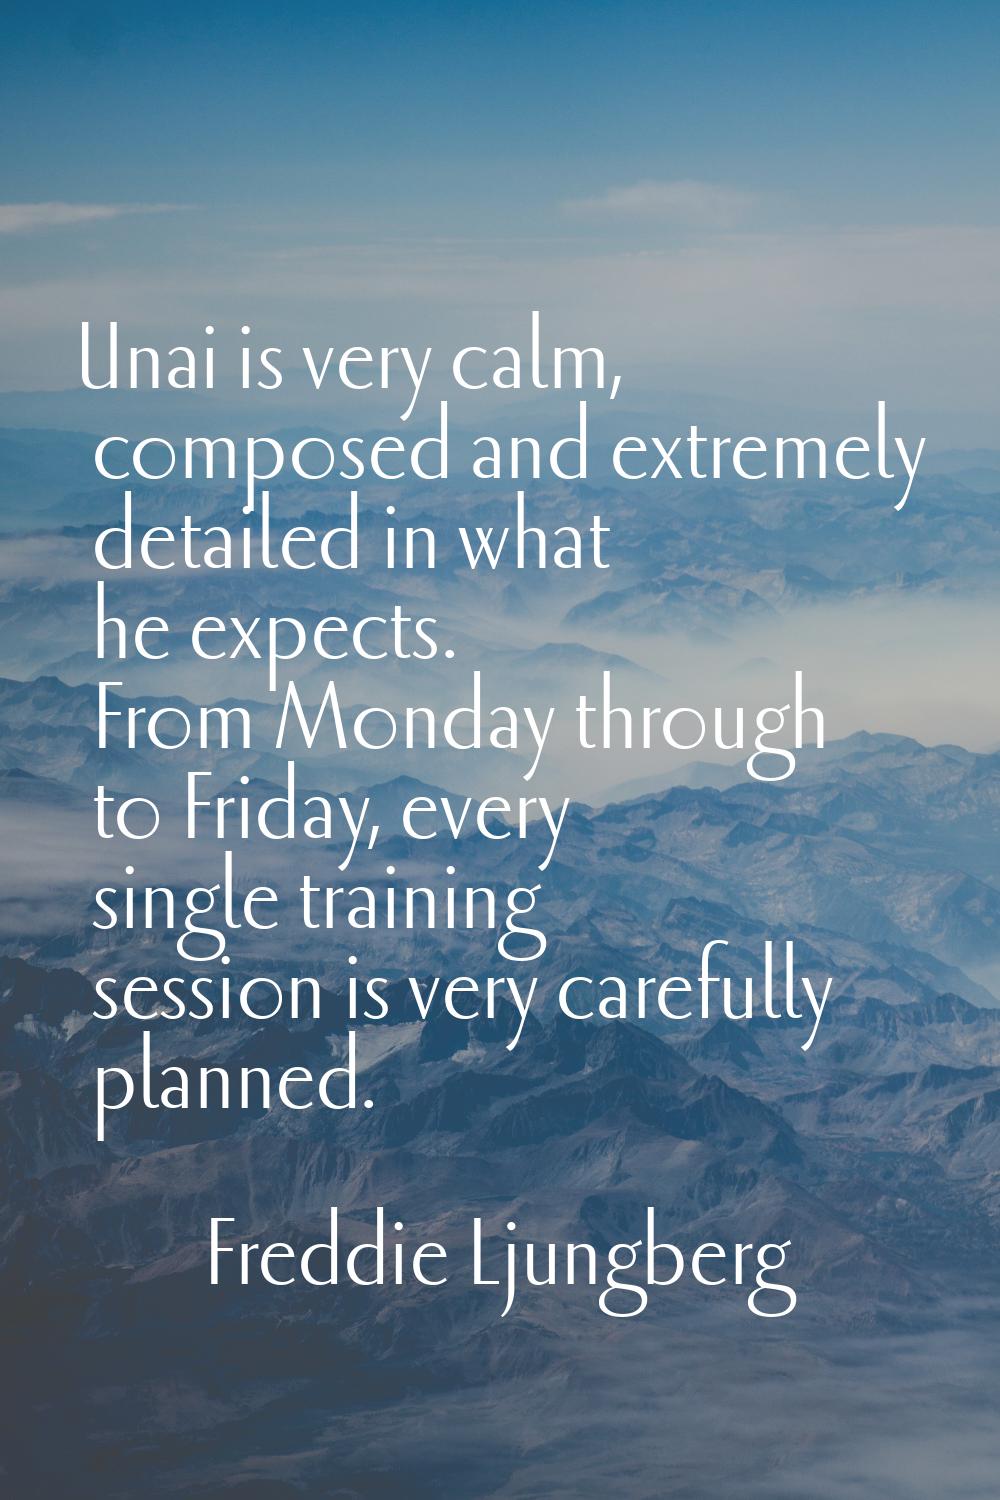 Unai is very calm, composed and extremely detailed in what he expects. From Monday through to Frida